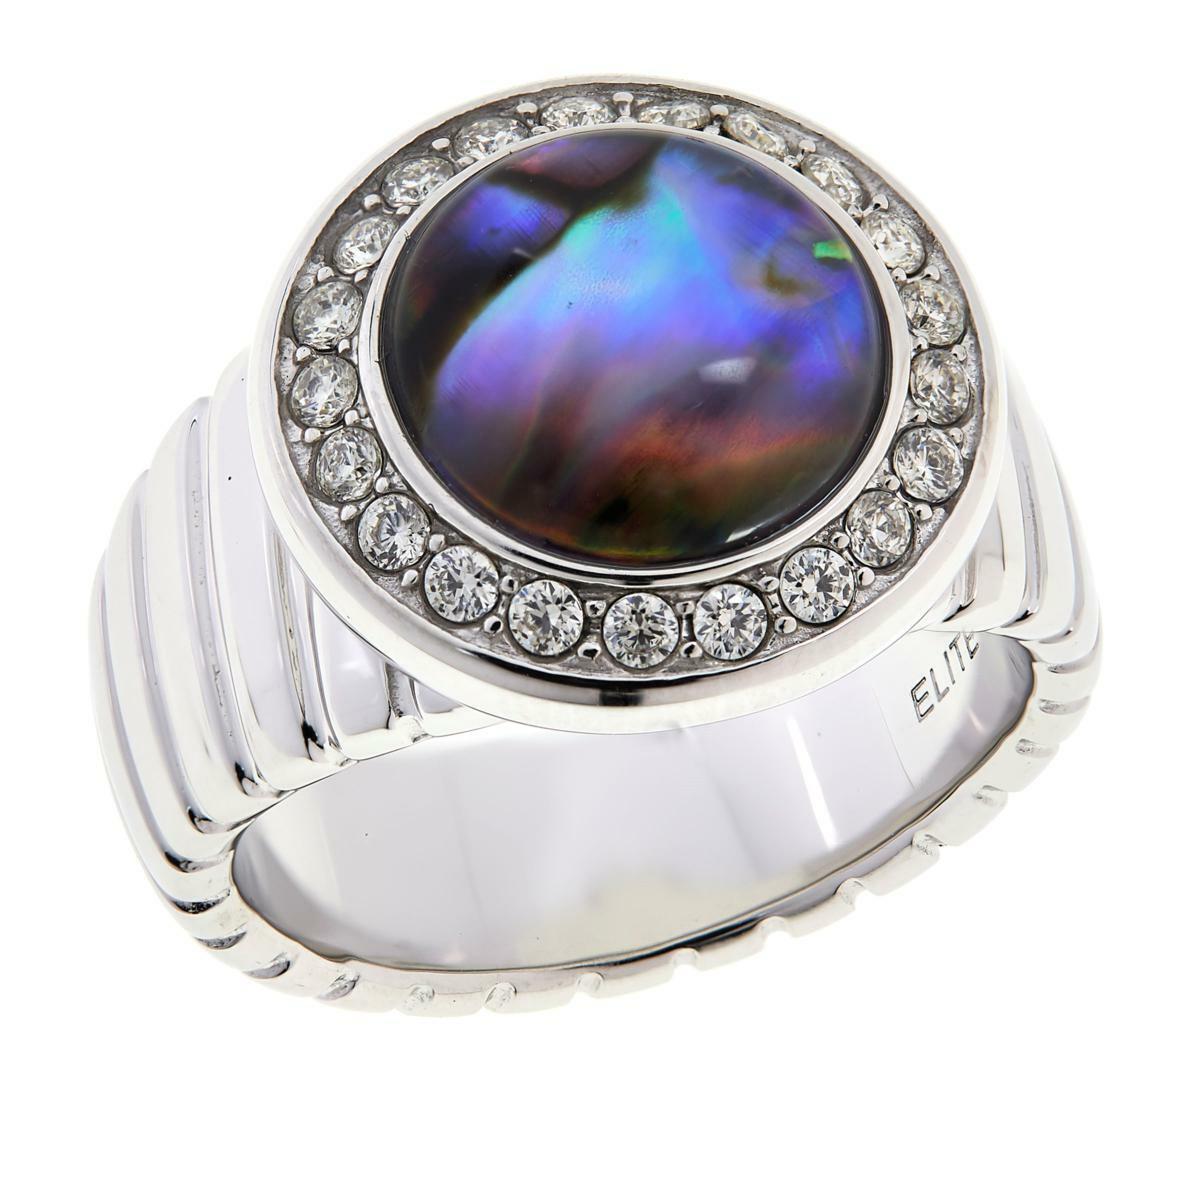 Colleen Lopez Labradorite Cabochon and White Topaz Ring, Size 5